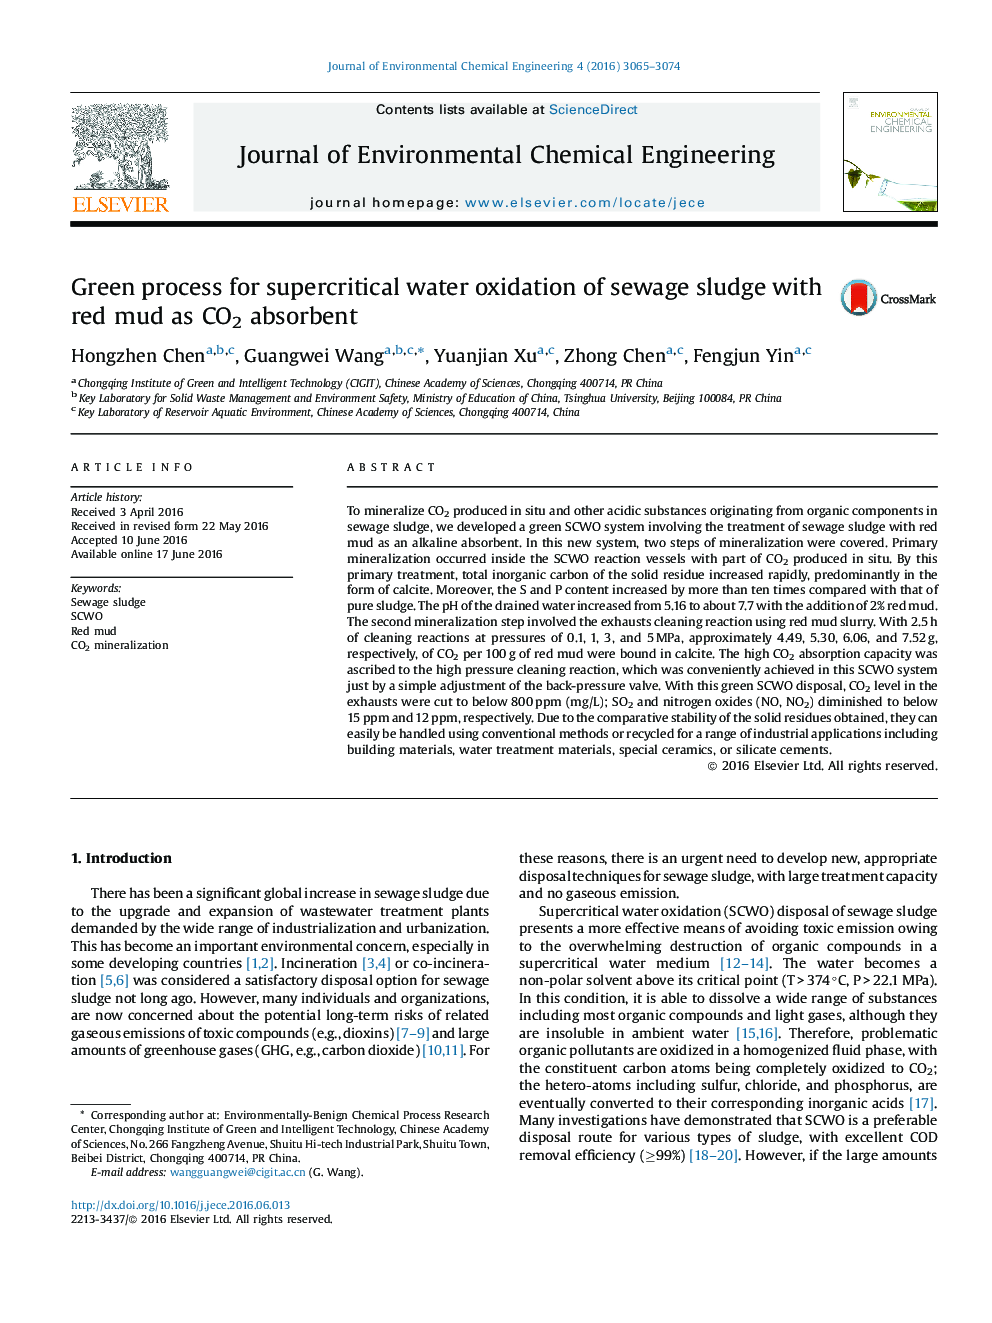 Green process for supercritical water oxidation of sewage sludge with red mud as CO2 absorbent